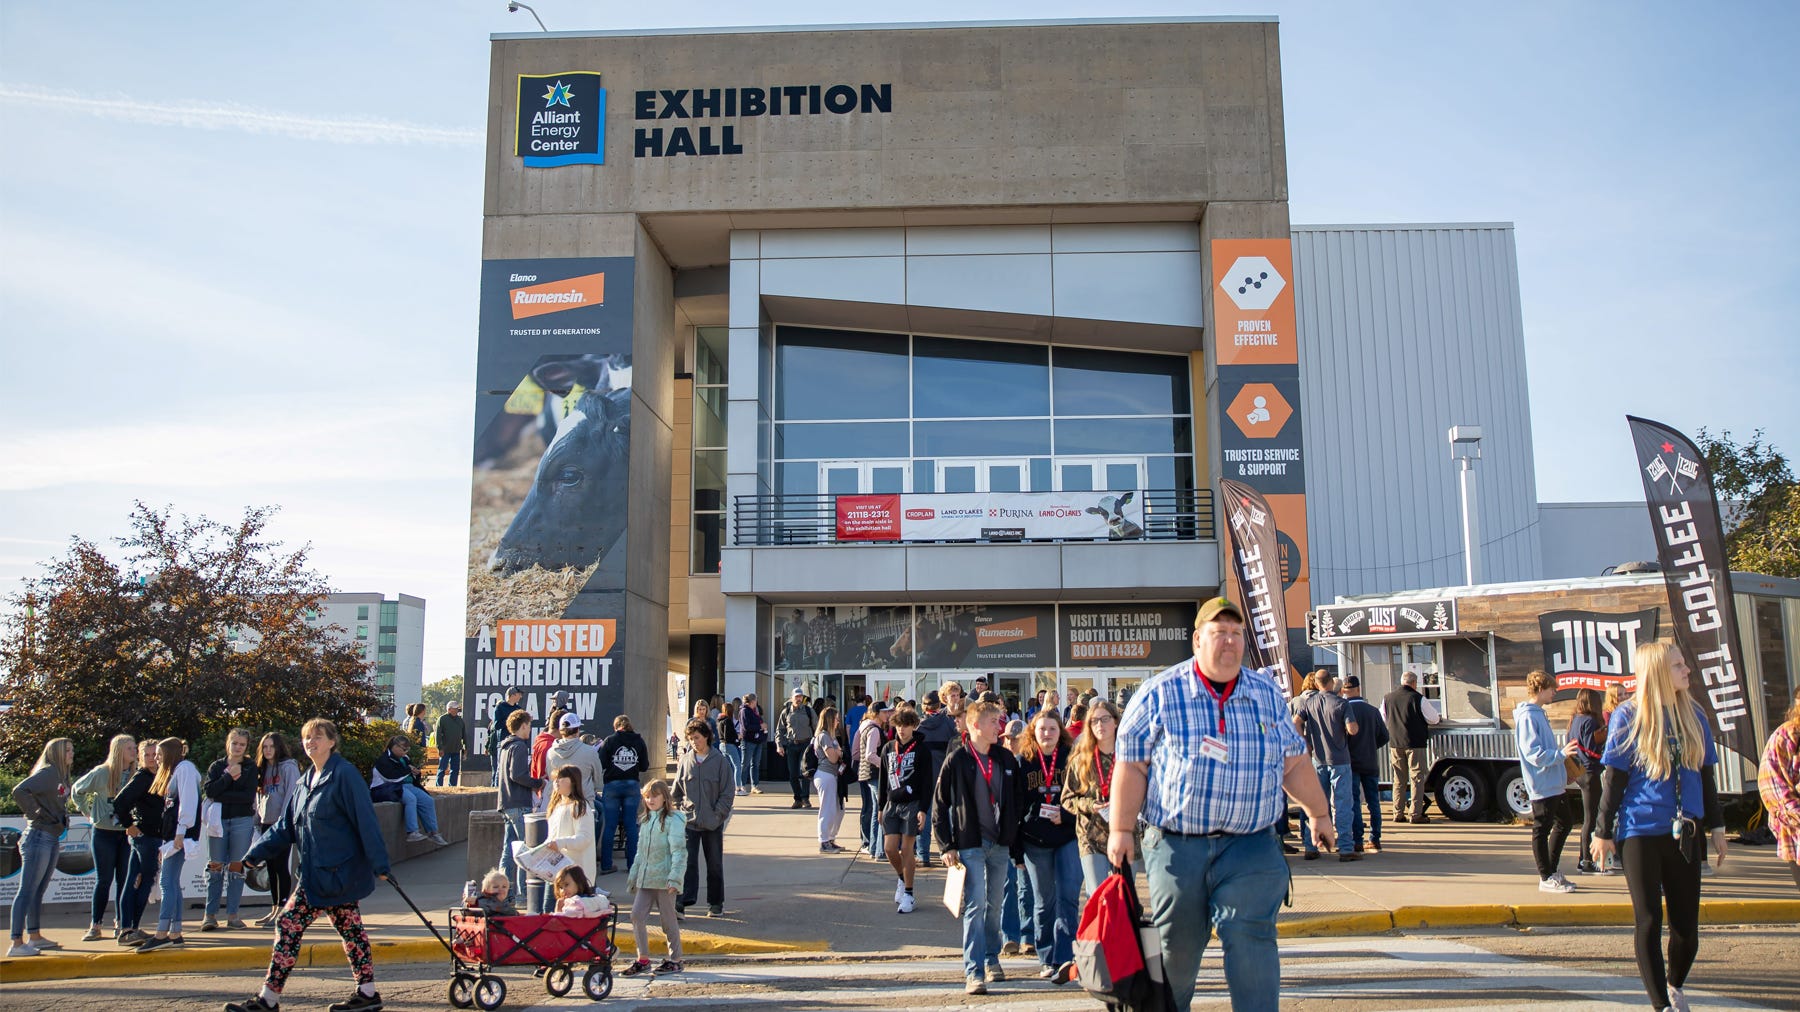 crowds of people exiting a large building called Exhibition Hall